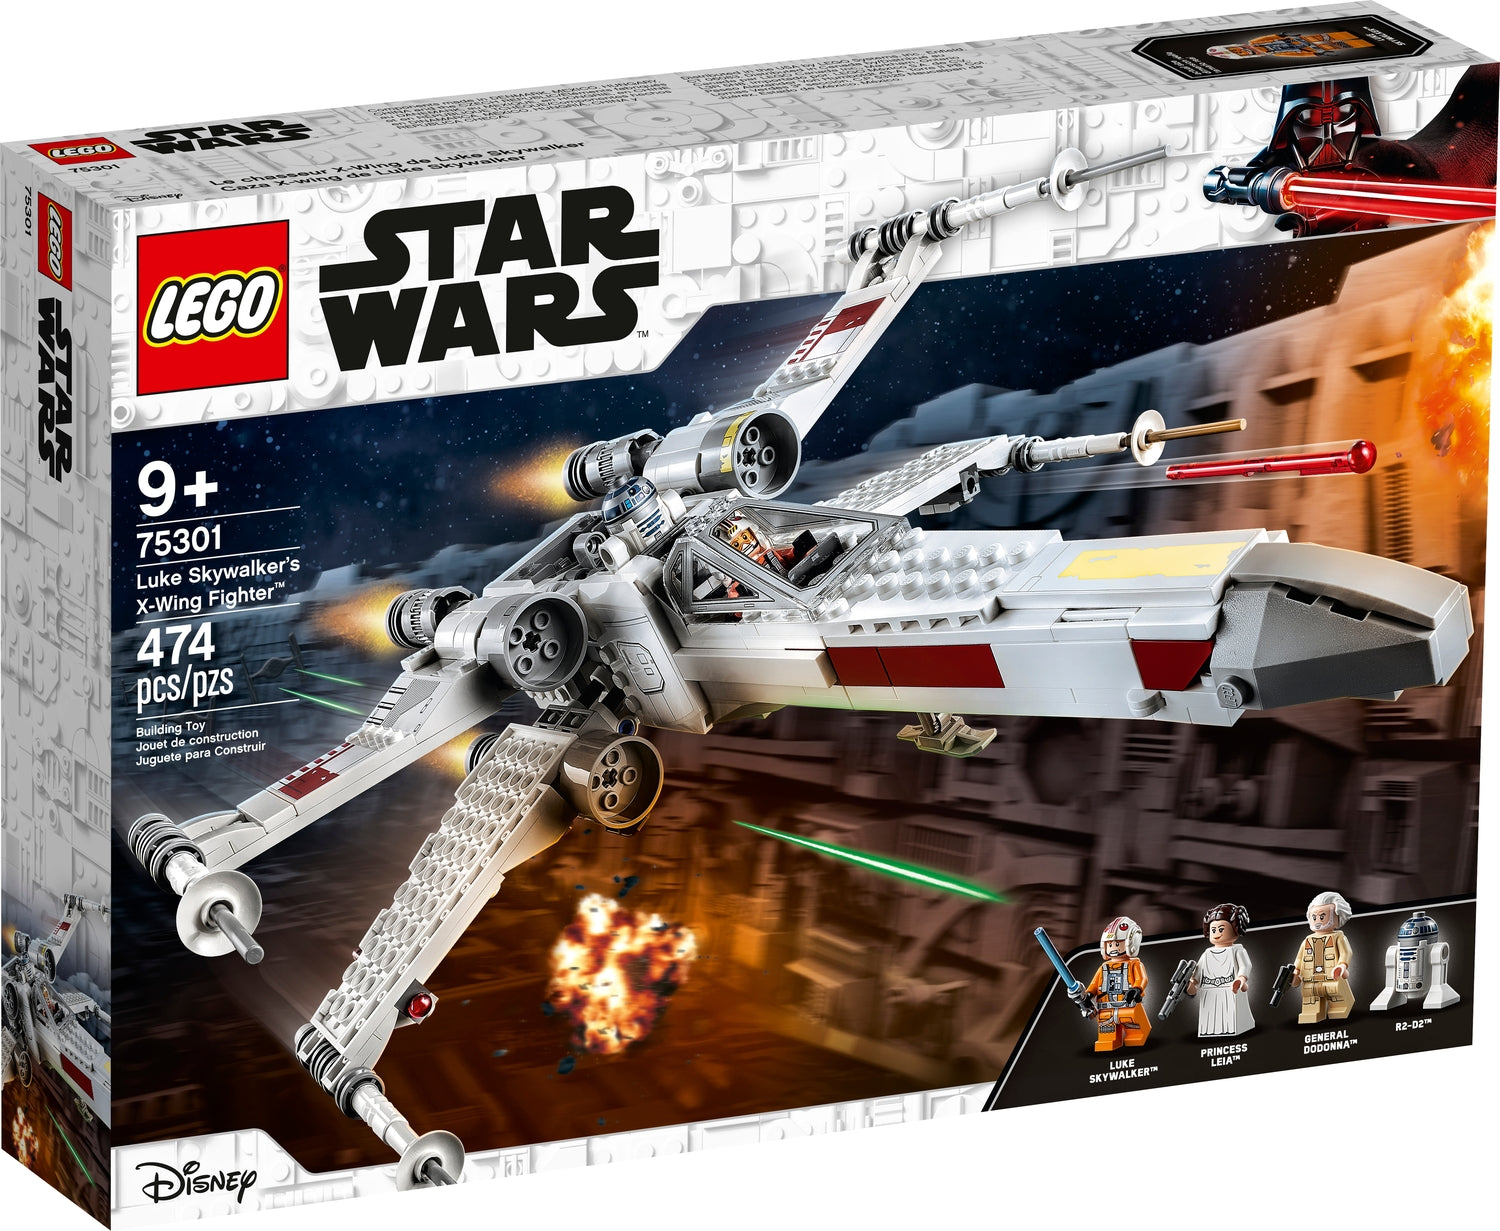 The Child Plush 5006622 | Star Wars™ | Buy online at the Official LEGO®  Shop US